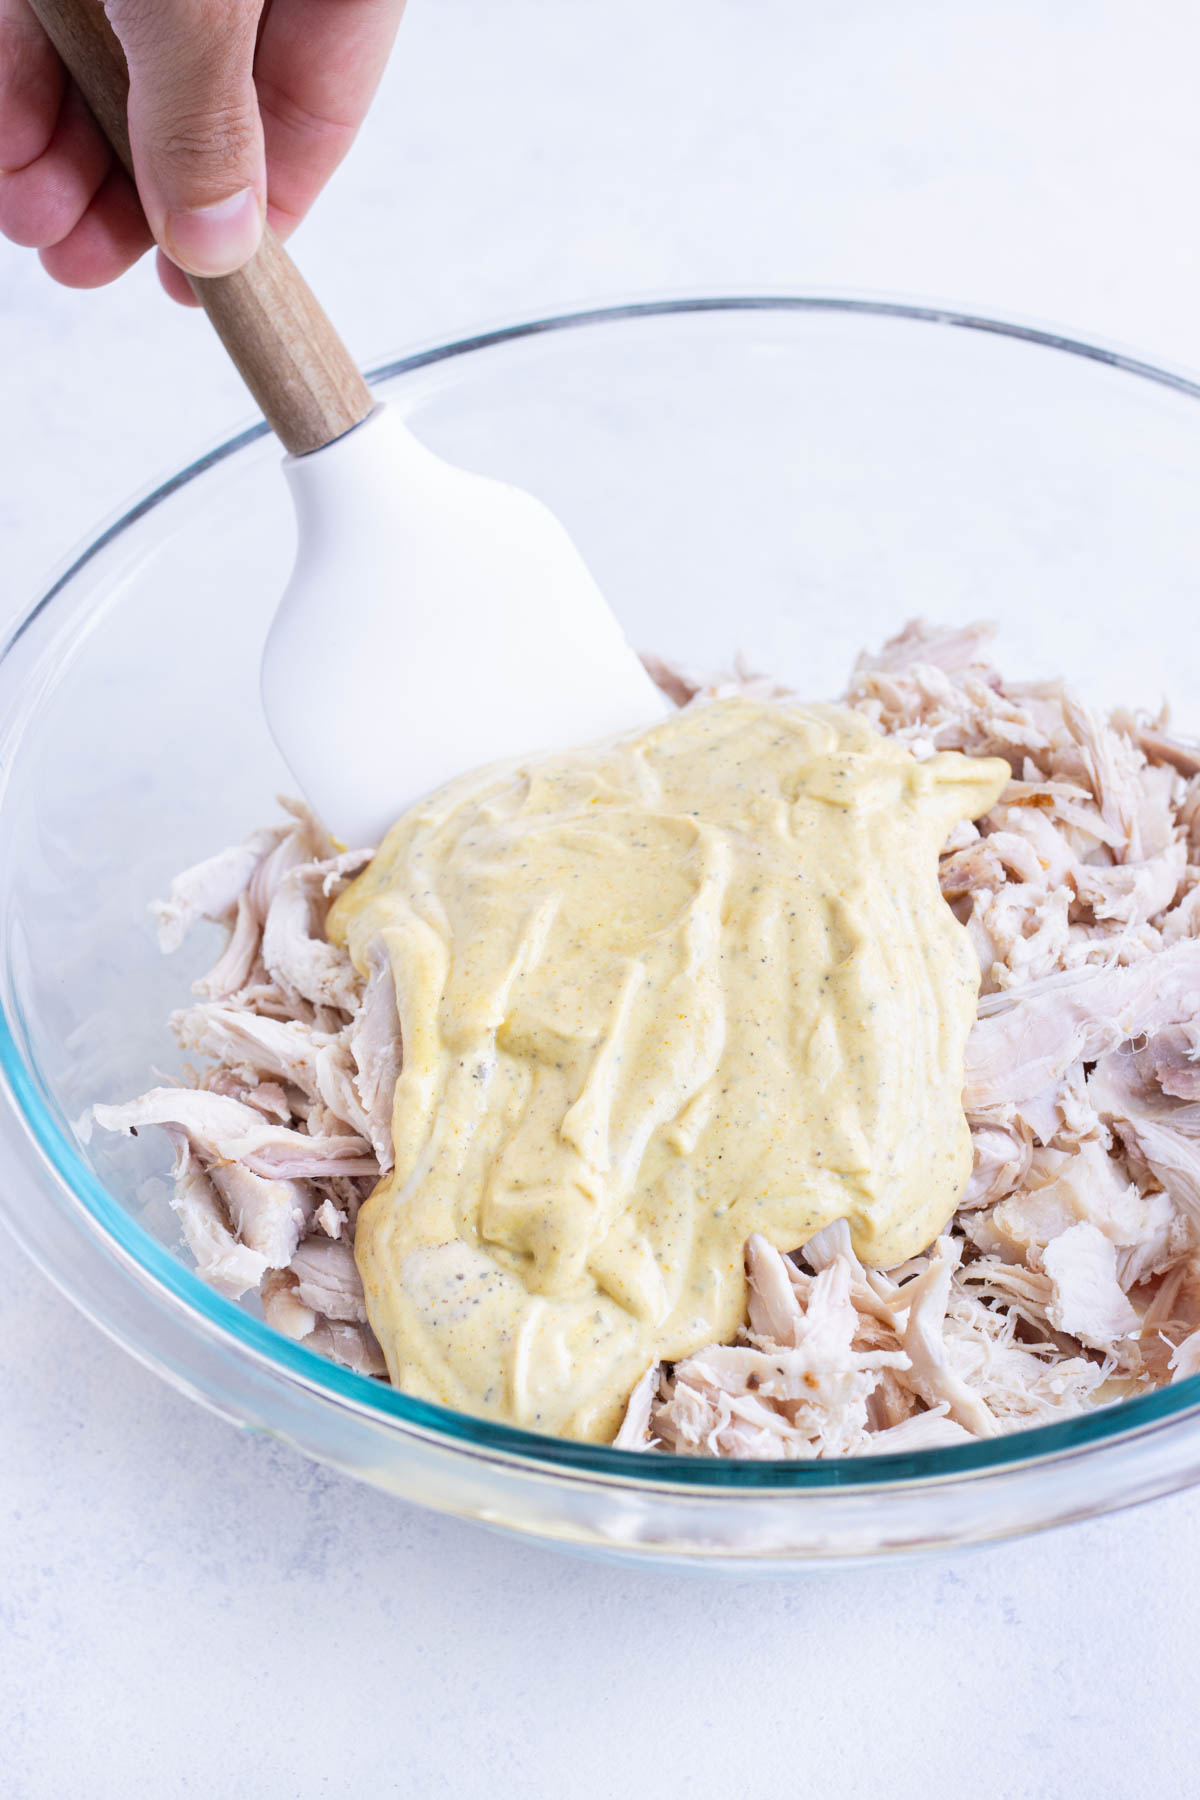 Dressing is added to the shredded chicken.